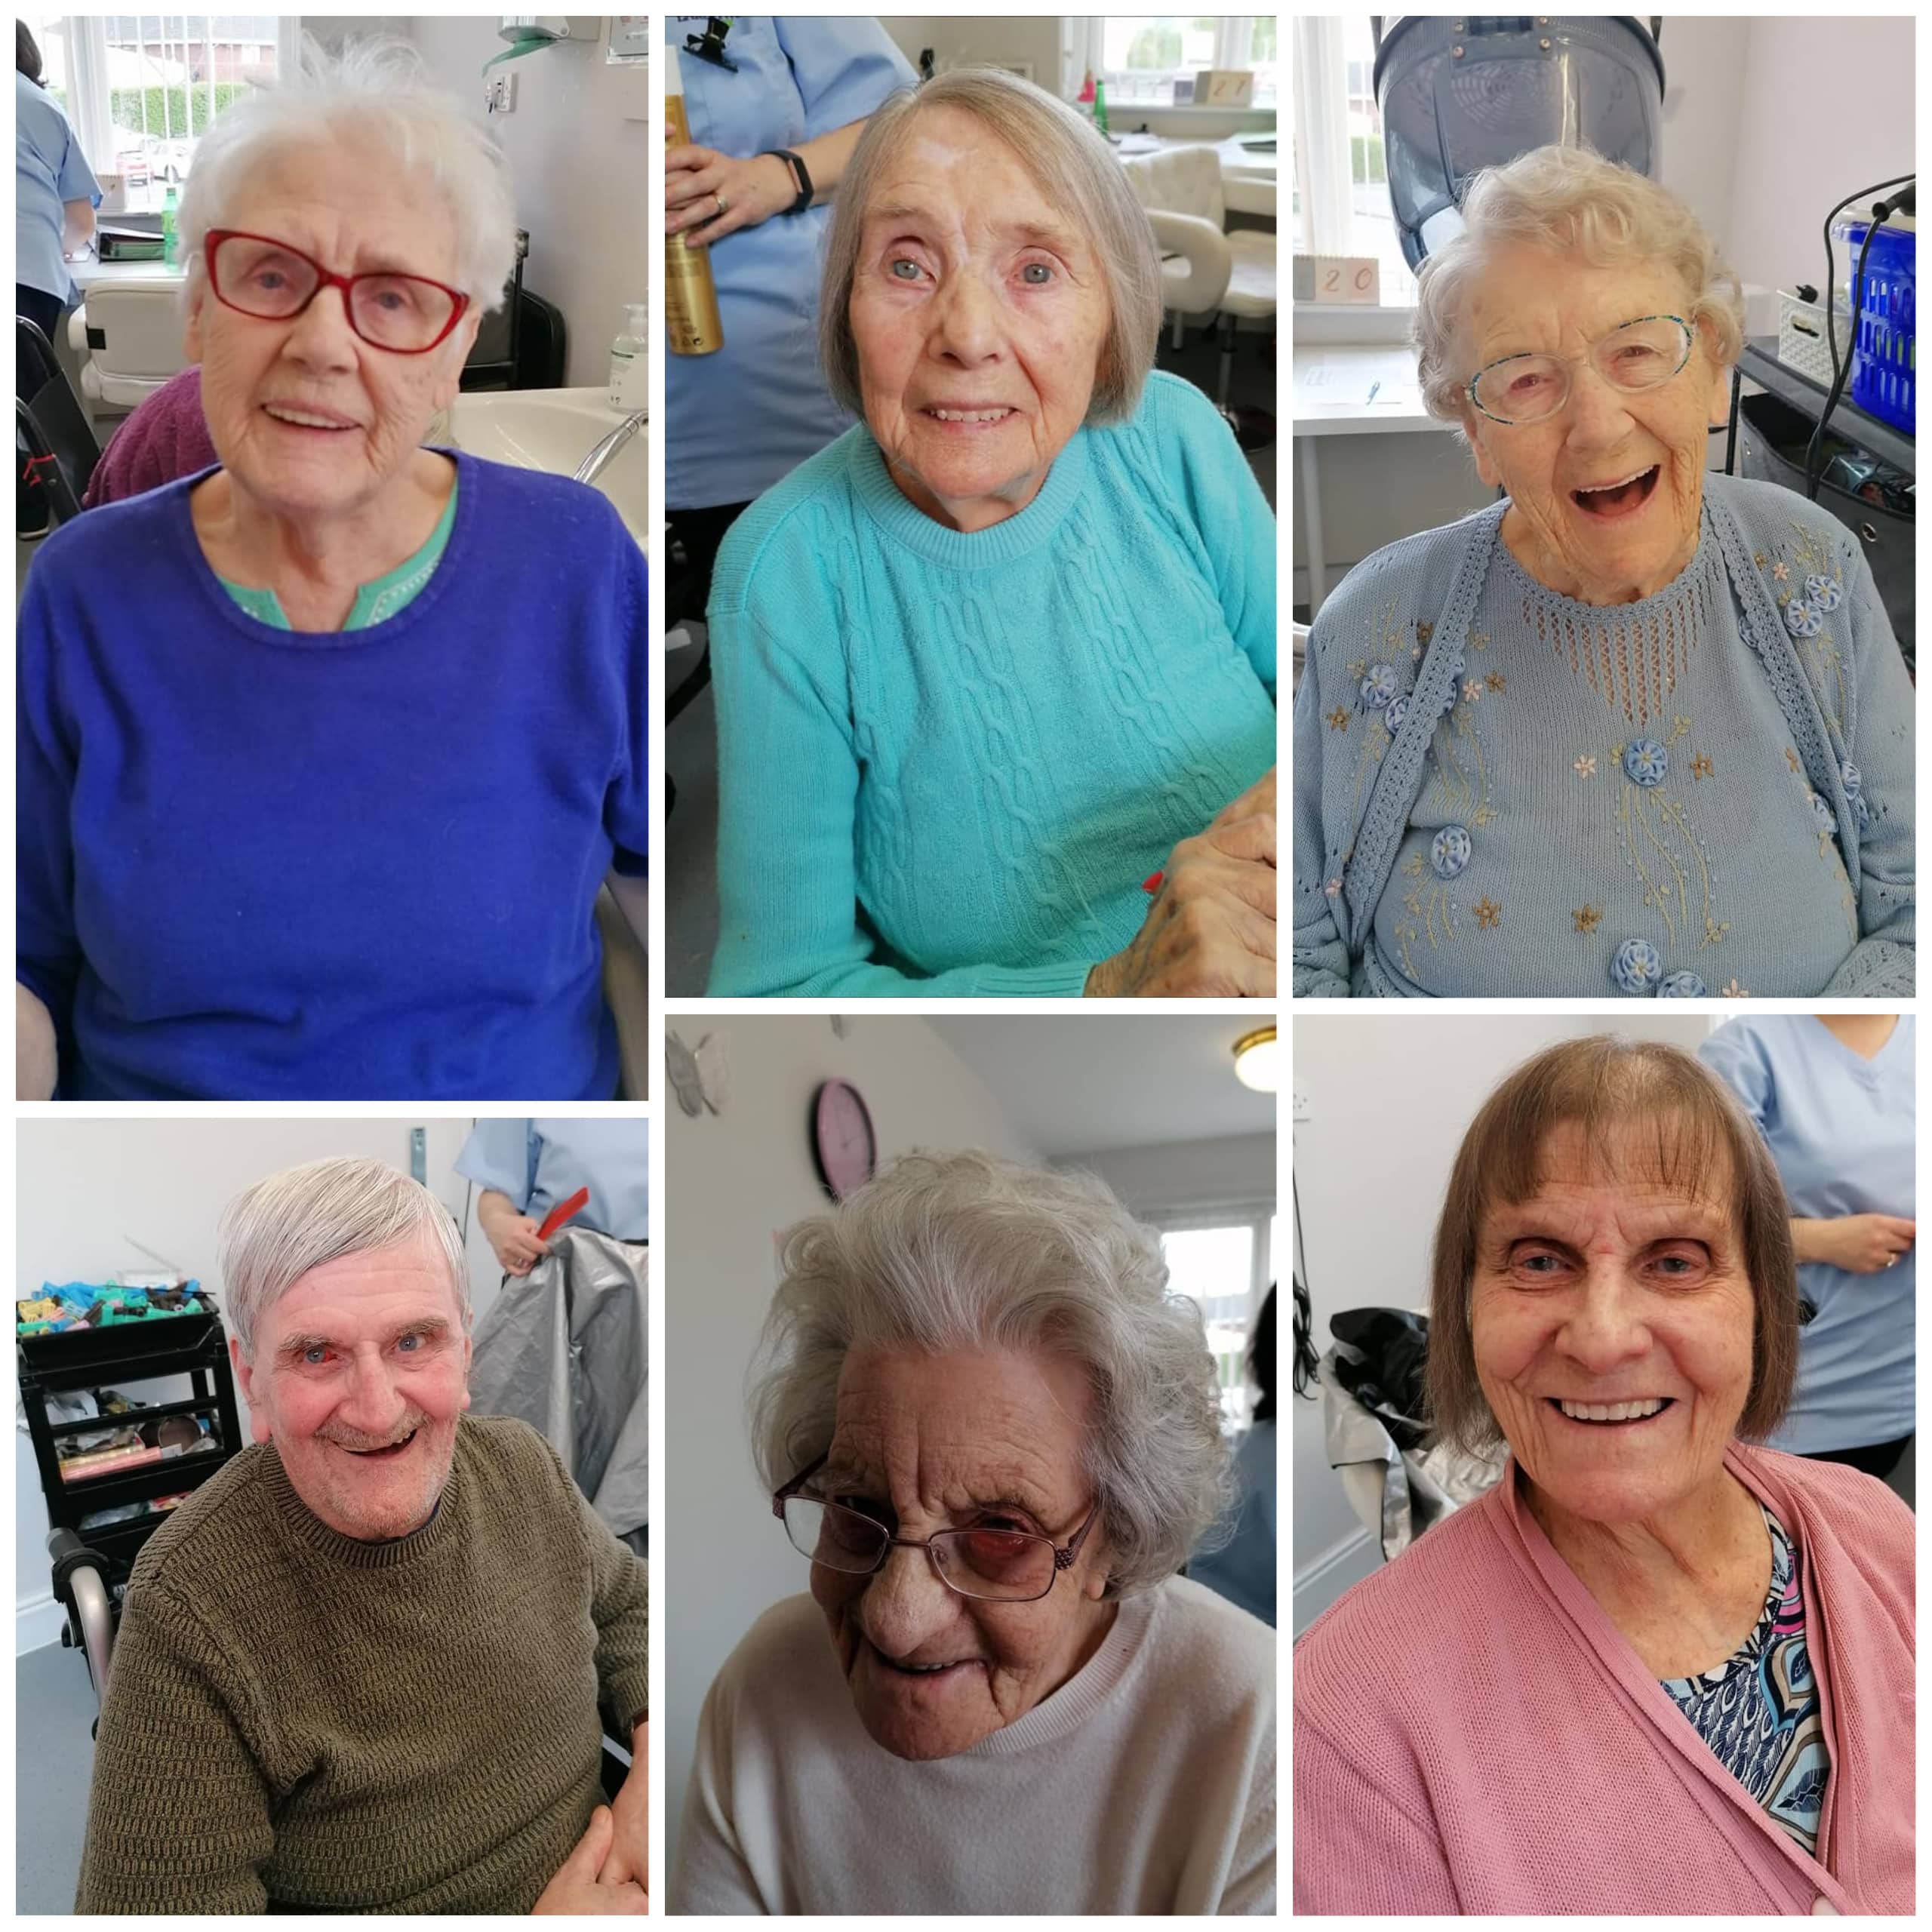 Residents at Atherton-based care home The Chanters enjoy their first trip to see the hairdresser in the home's salon for months.